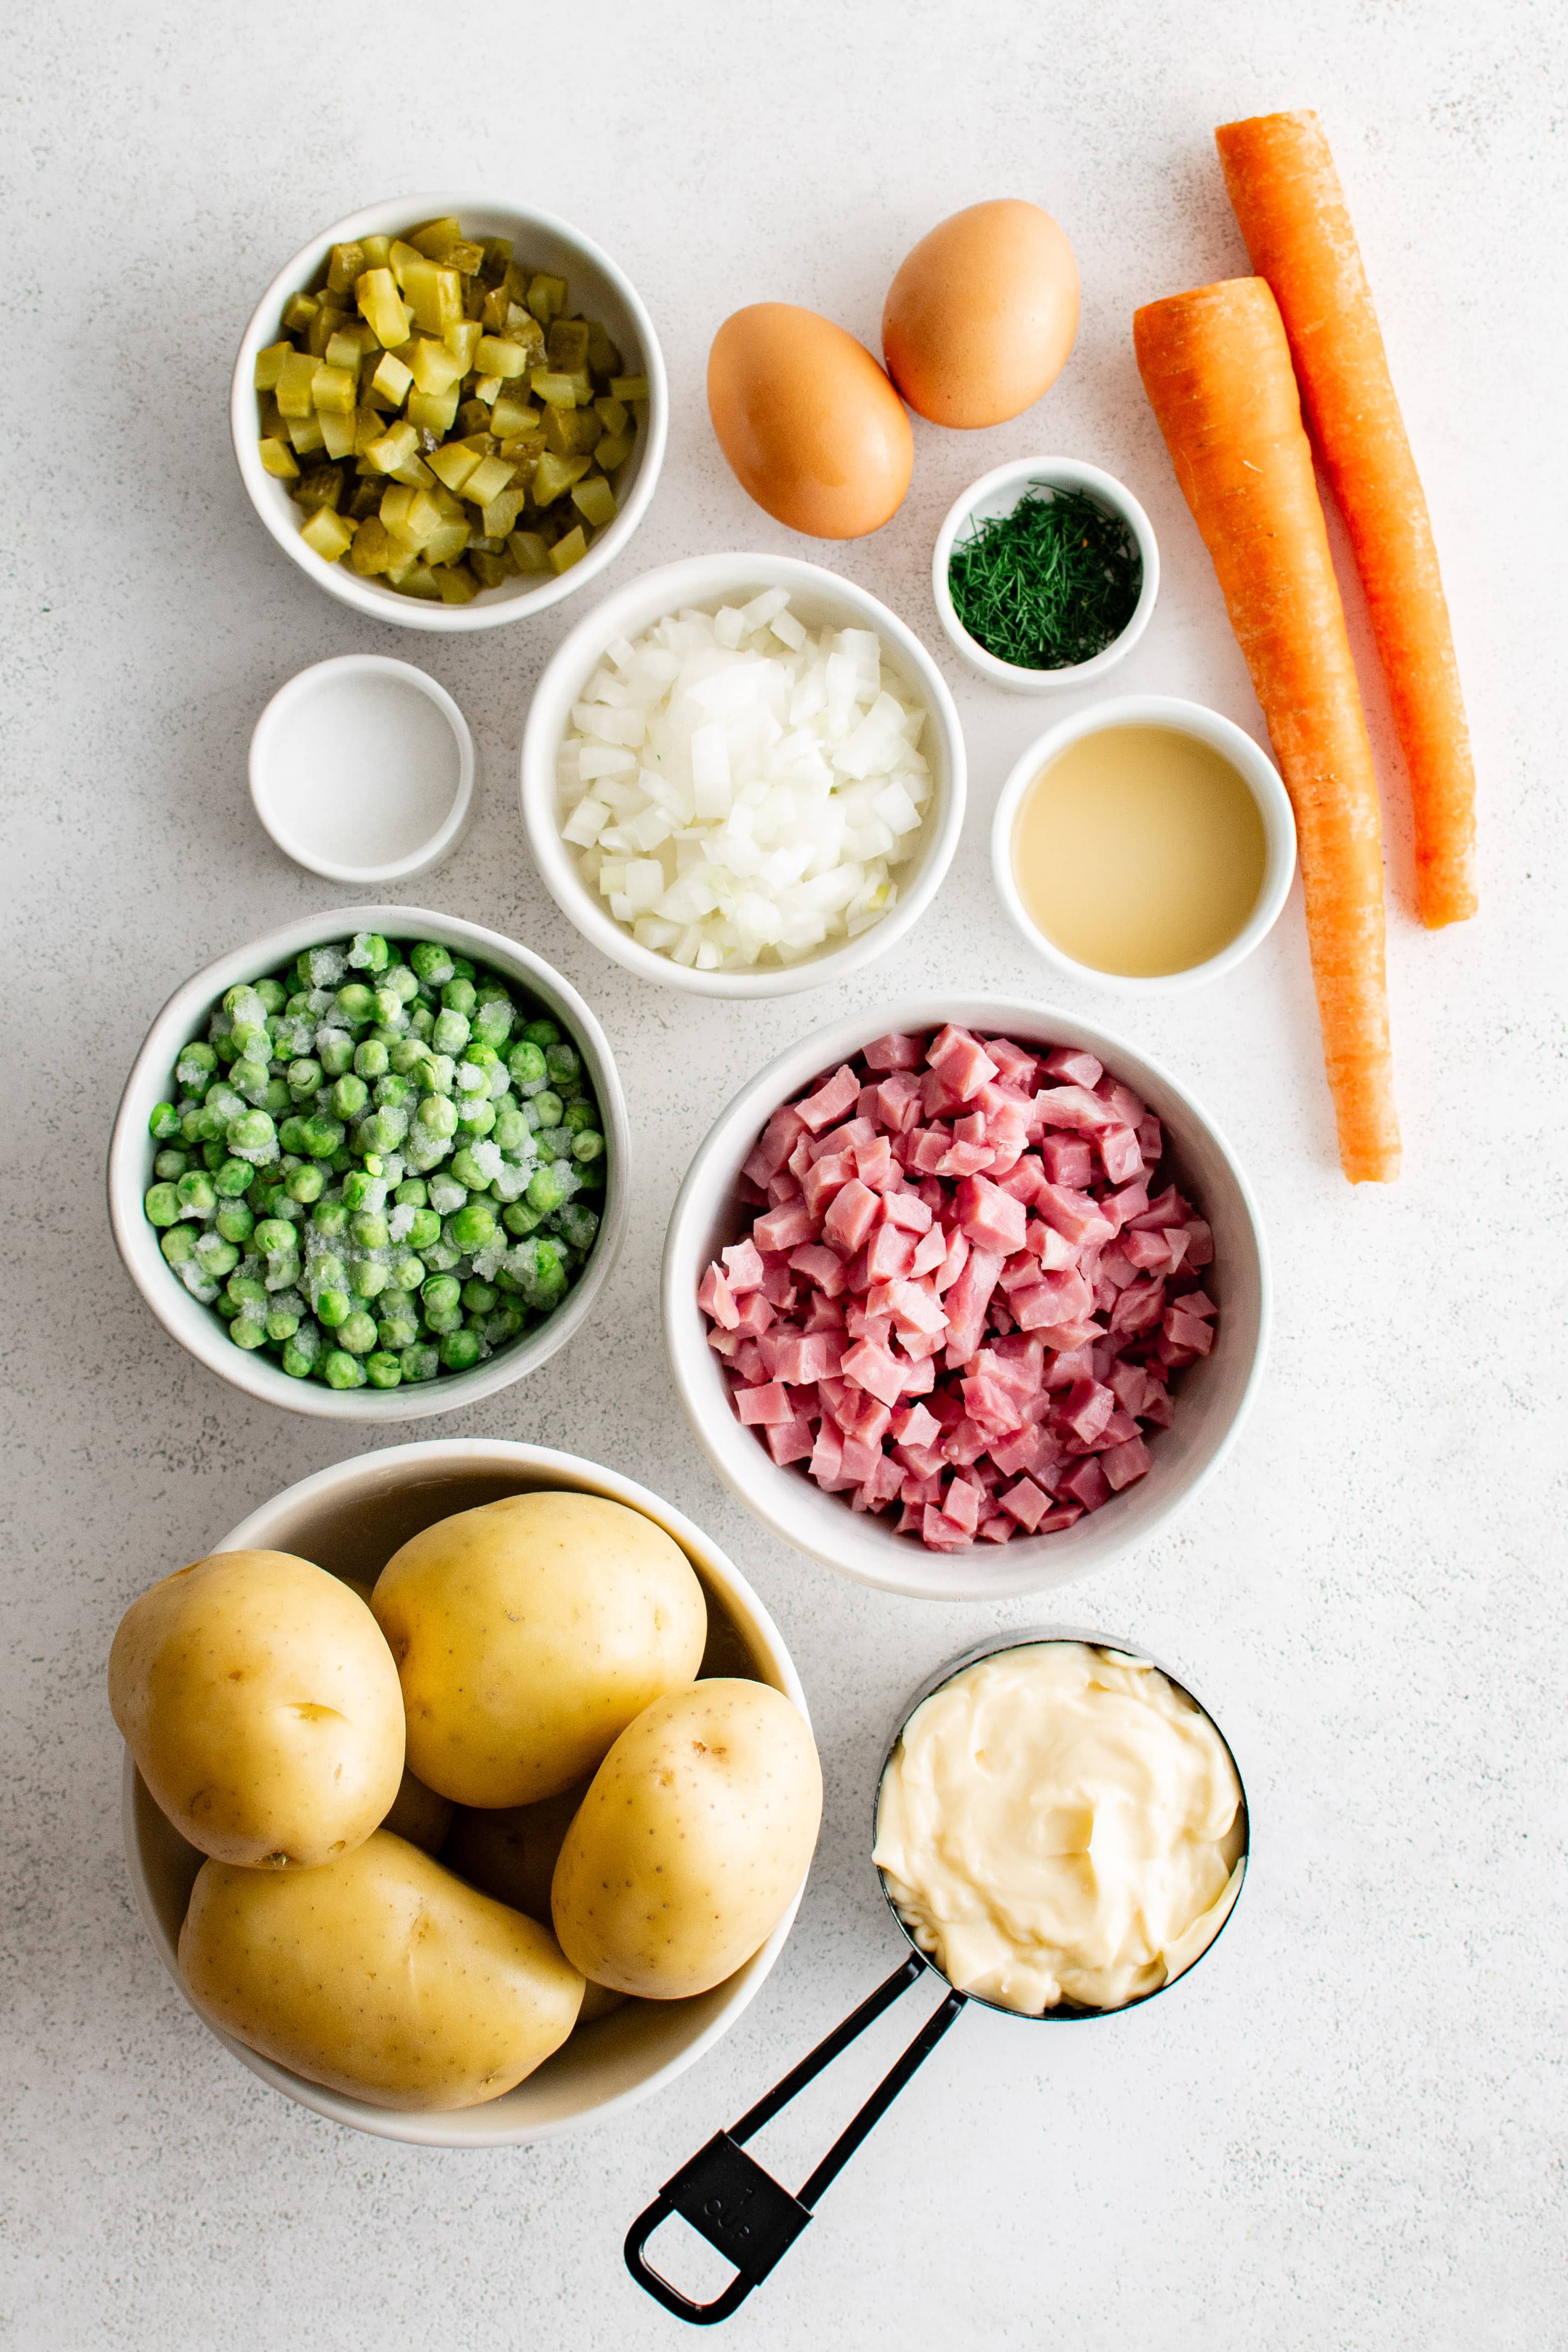 Ingredients needed to make homemade Olivier salad in individual measuring cups and ramekins.